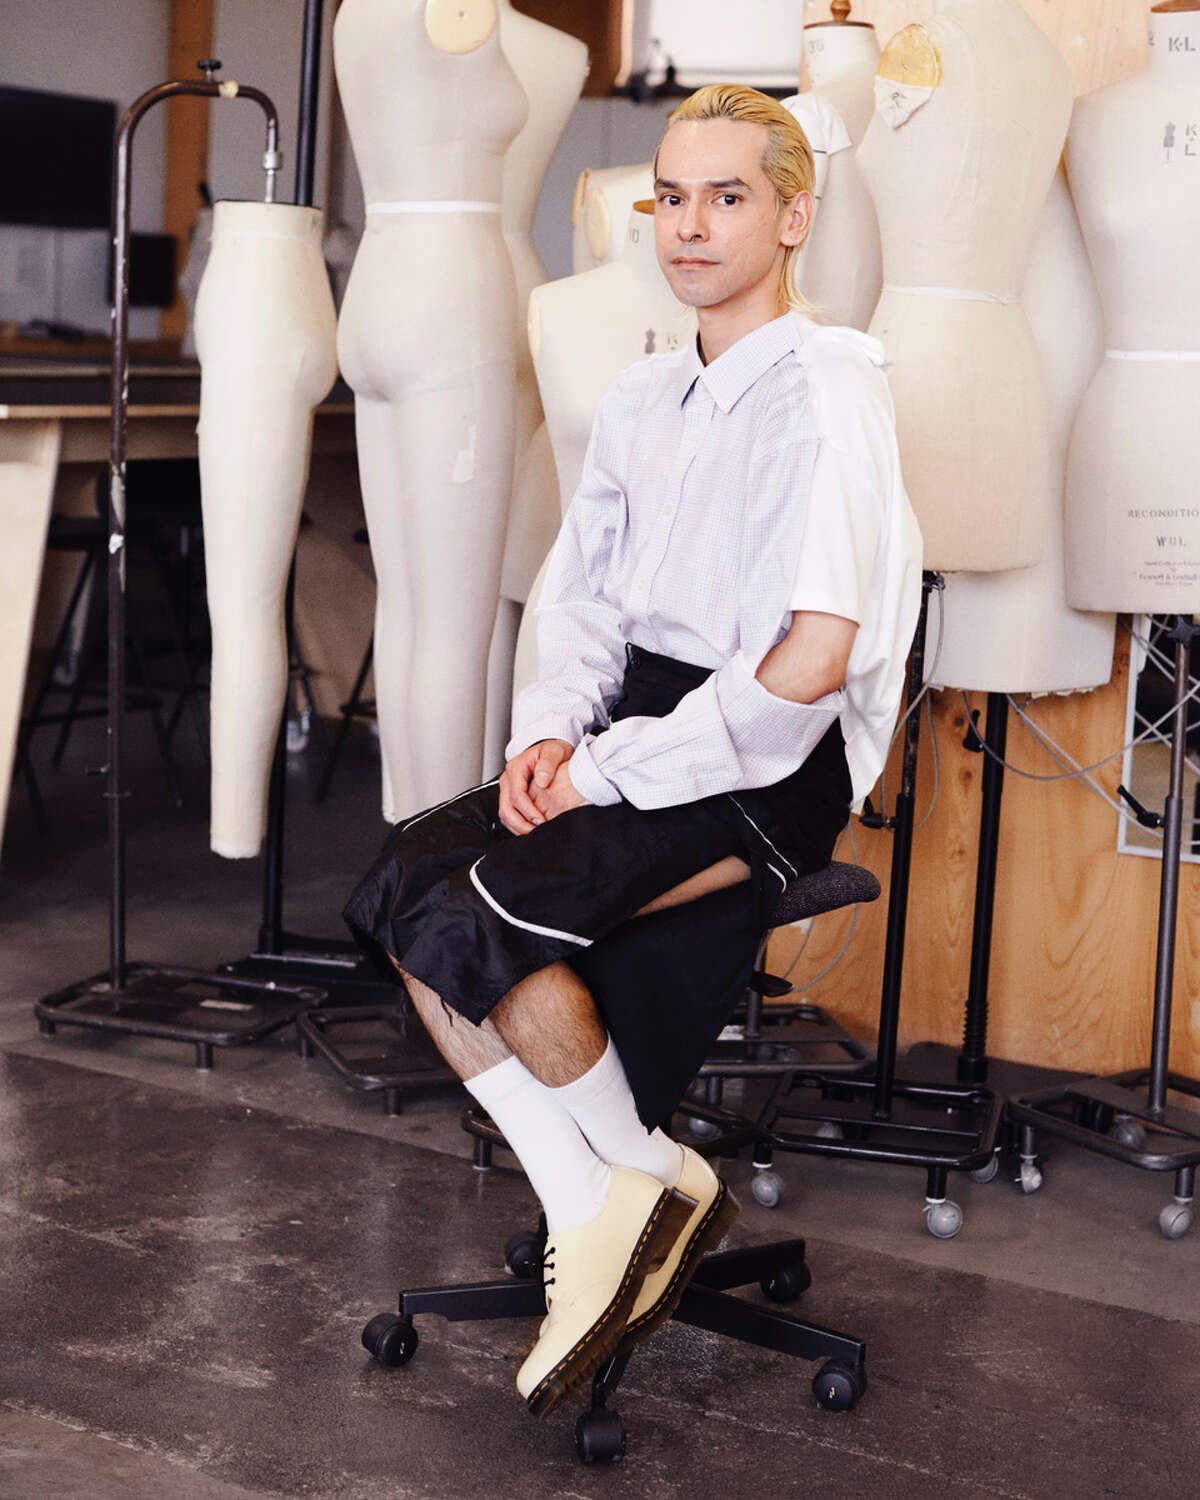 Jude Hinojosa, a student of Central Saint Martins' Masters Fashion program, has been chosen as one of five students whose work will be featured in Dr. Martens' "All Access Summer" campaign. 